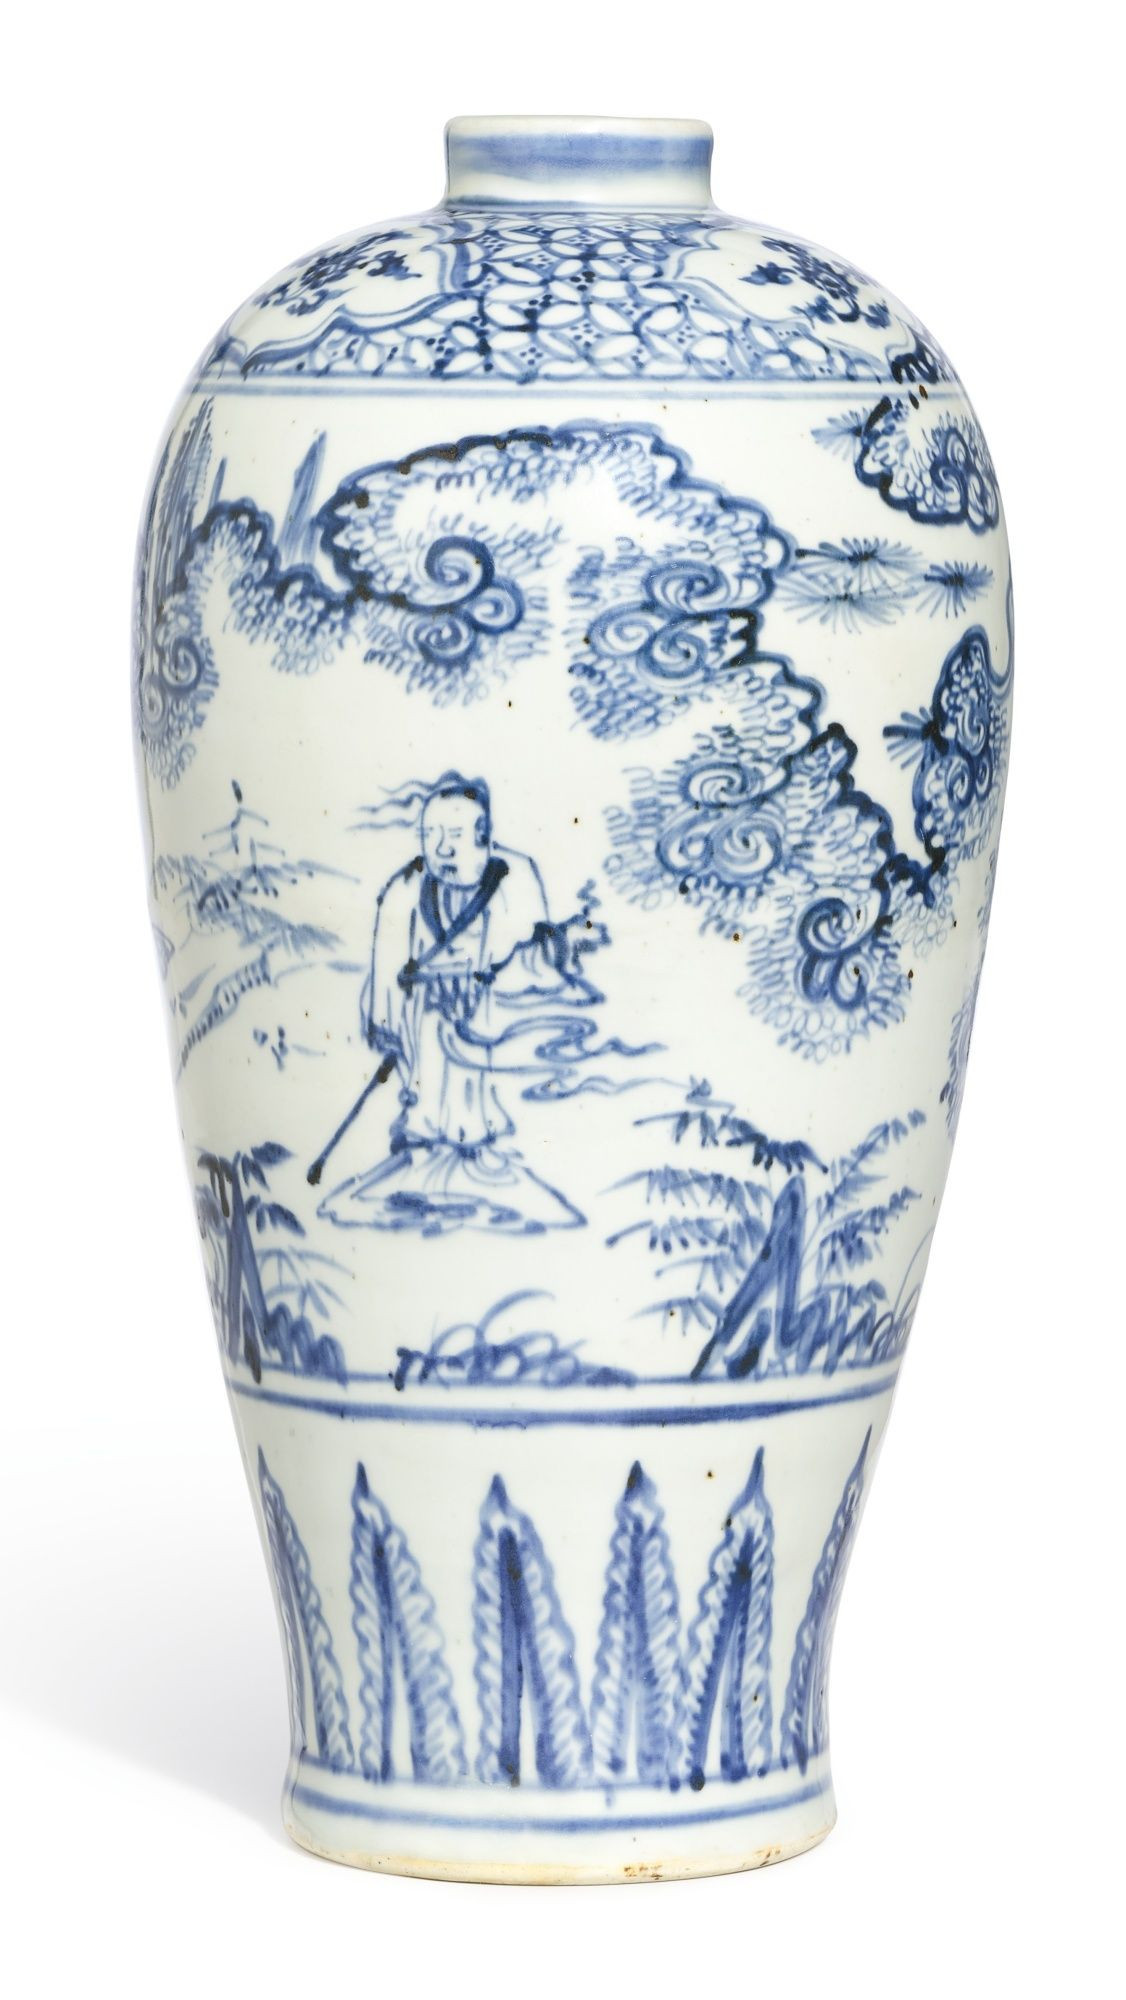 12 Elegant Mccoy White Vase 2024 free download mccoy white vase of antique white vase pics a blue and white figure meiping br ming for antique white vase pics a blue and white figure meiping br ming dynasty 15th century of